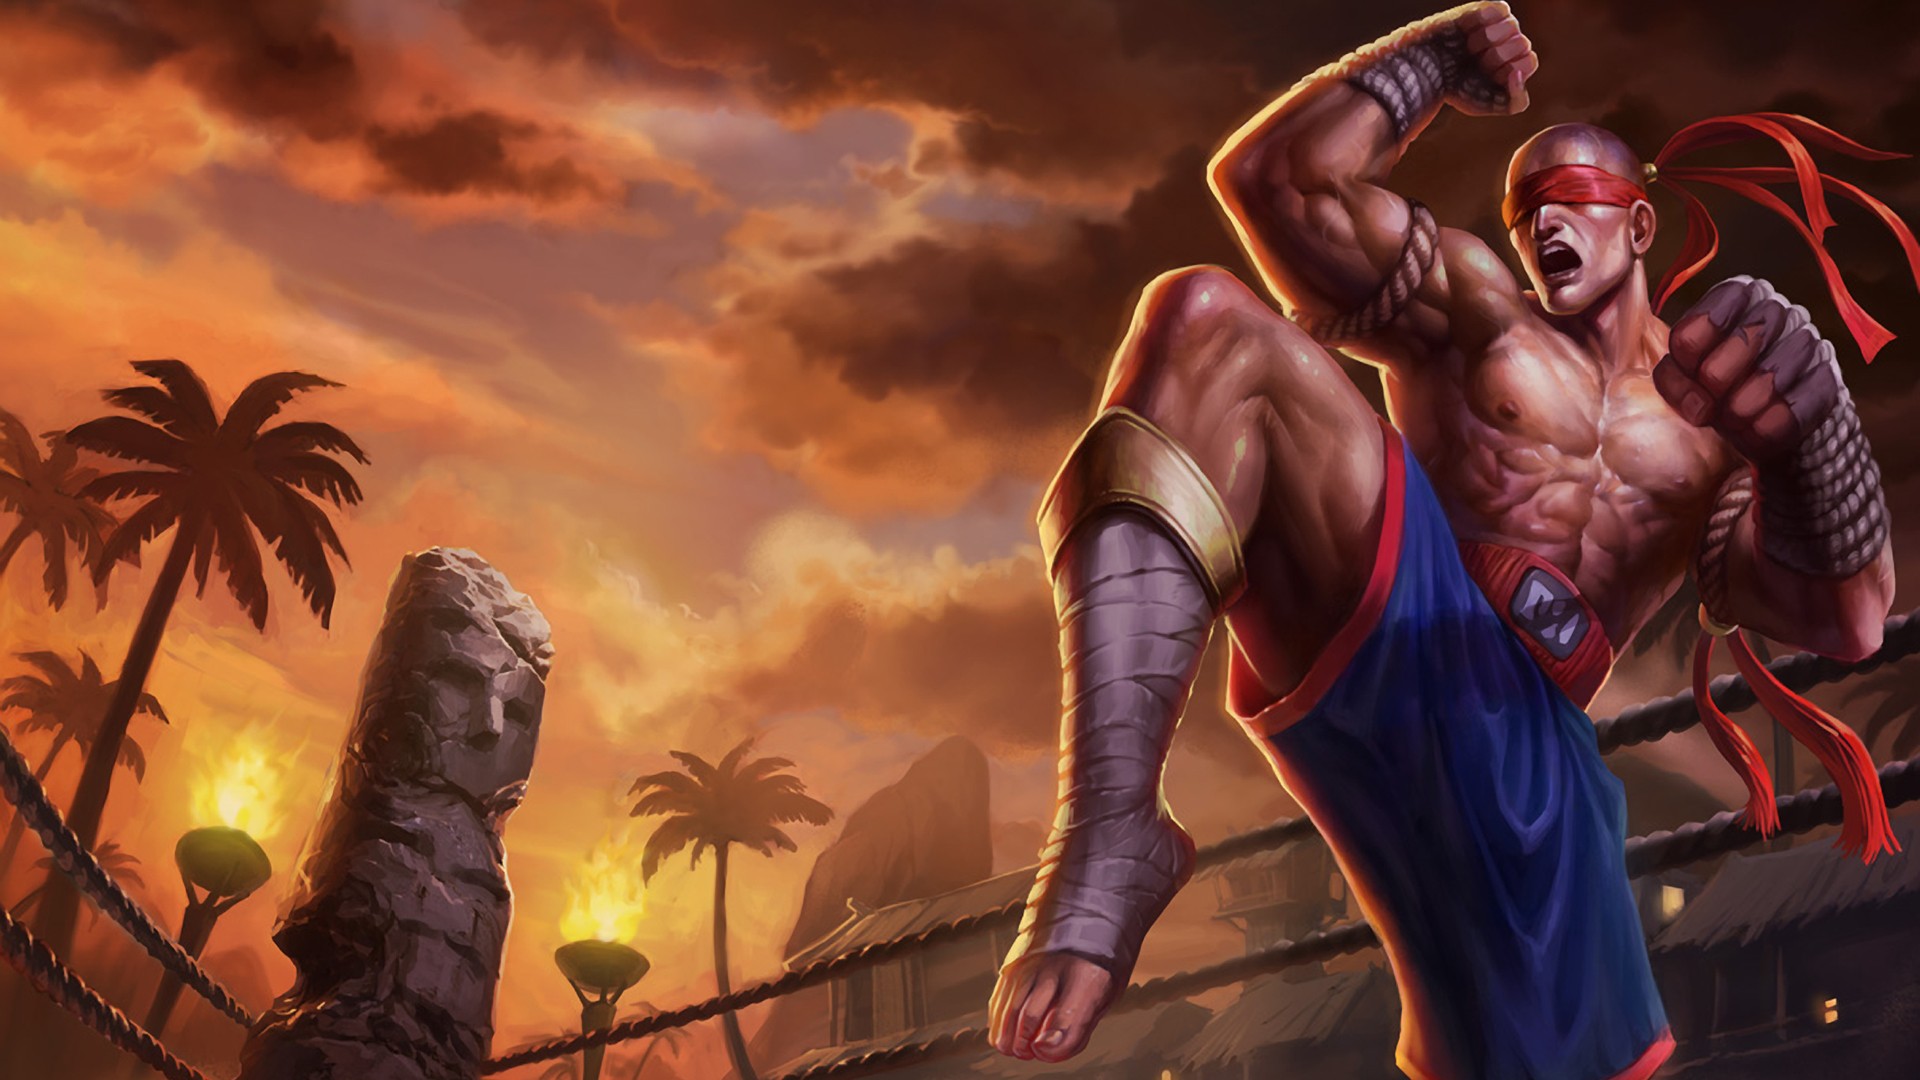 General 1920x1080 Lee Sin (League of Legends) video game warriors PC gaming muscles open mouth orange sky video game men video game art digital art